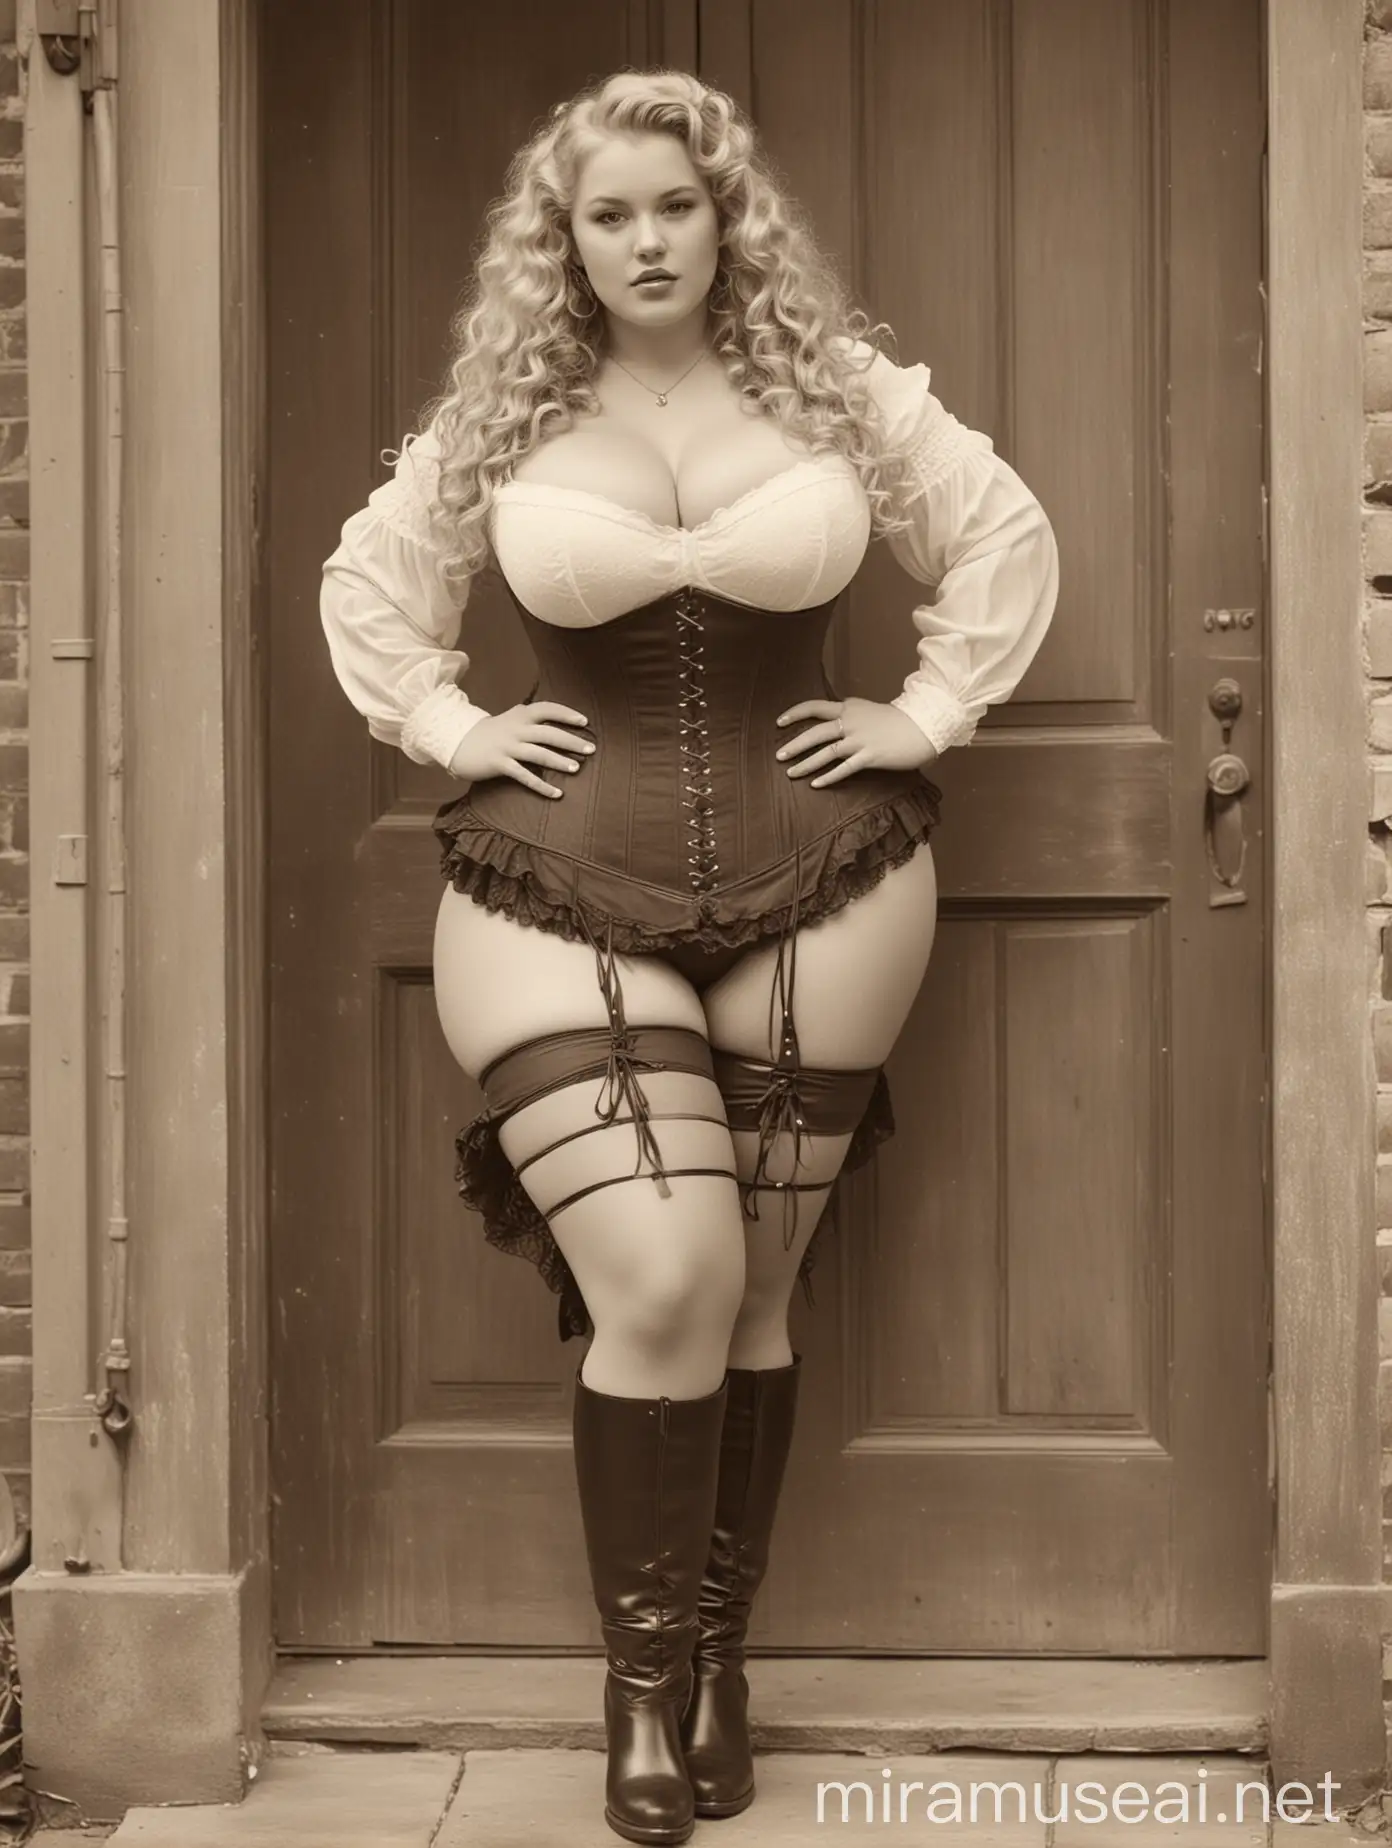 Vintage Sepia Portrait Curvy PlusSize Woman in Victorian Corset and Boots